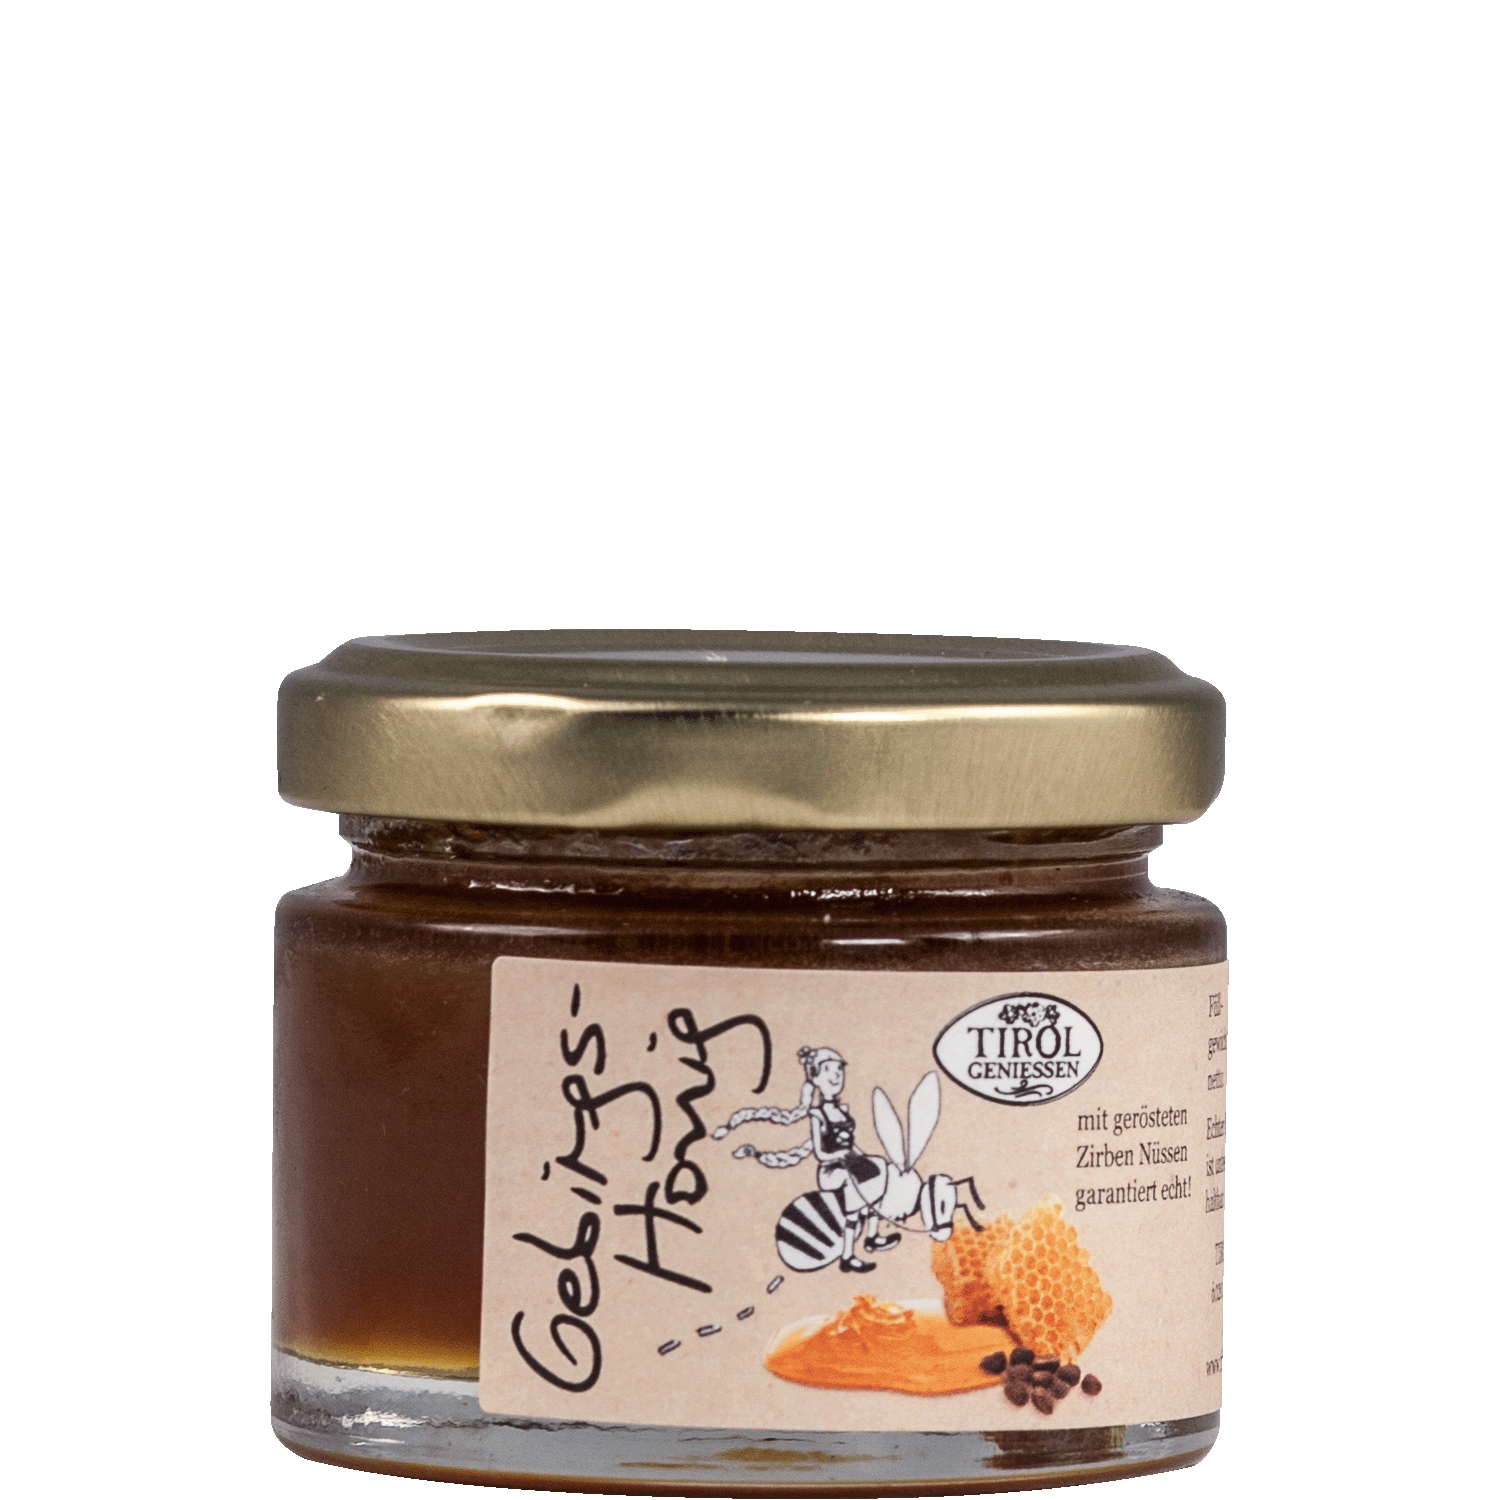 Mountain Honey with Pine Nuts from Austria from Tirol Geniessen